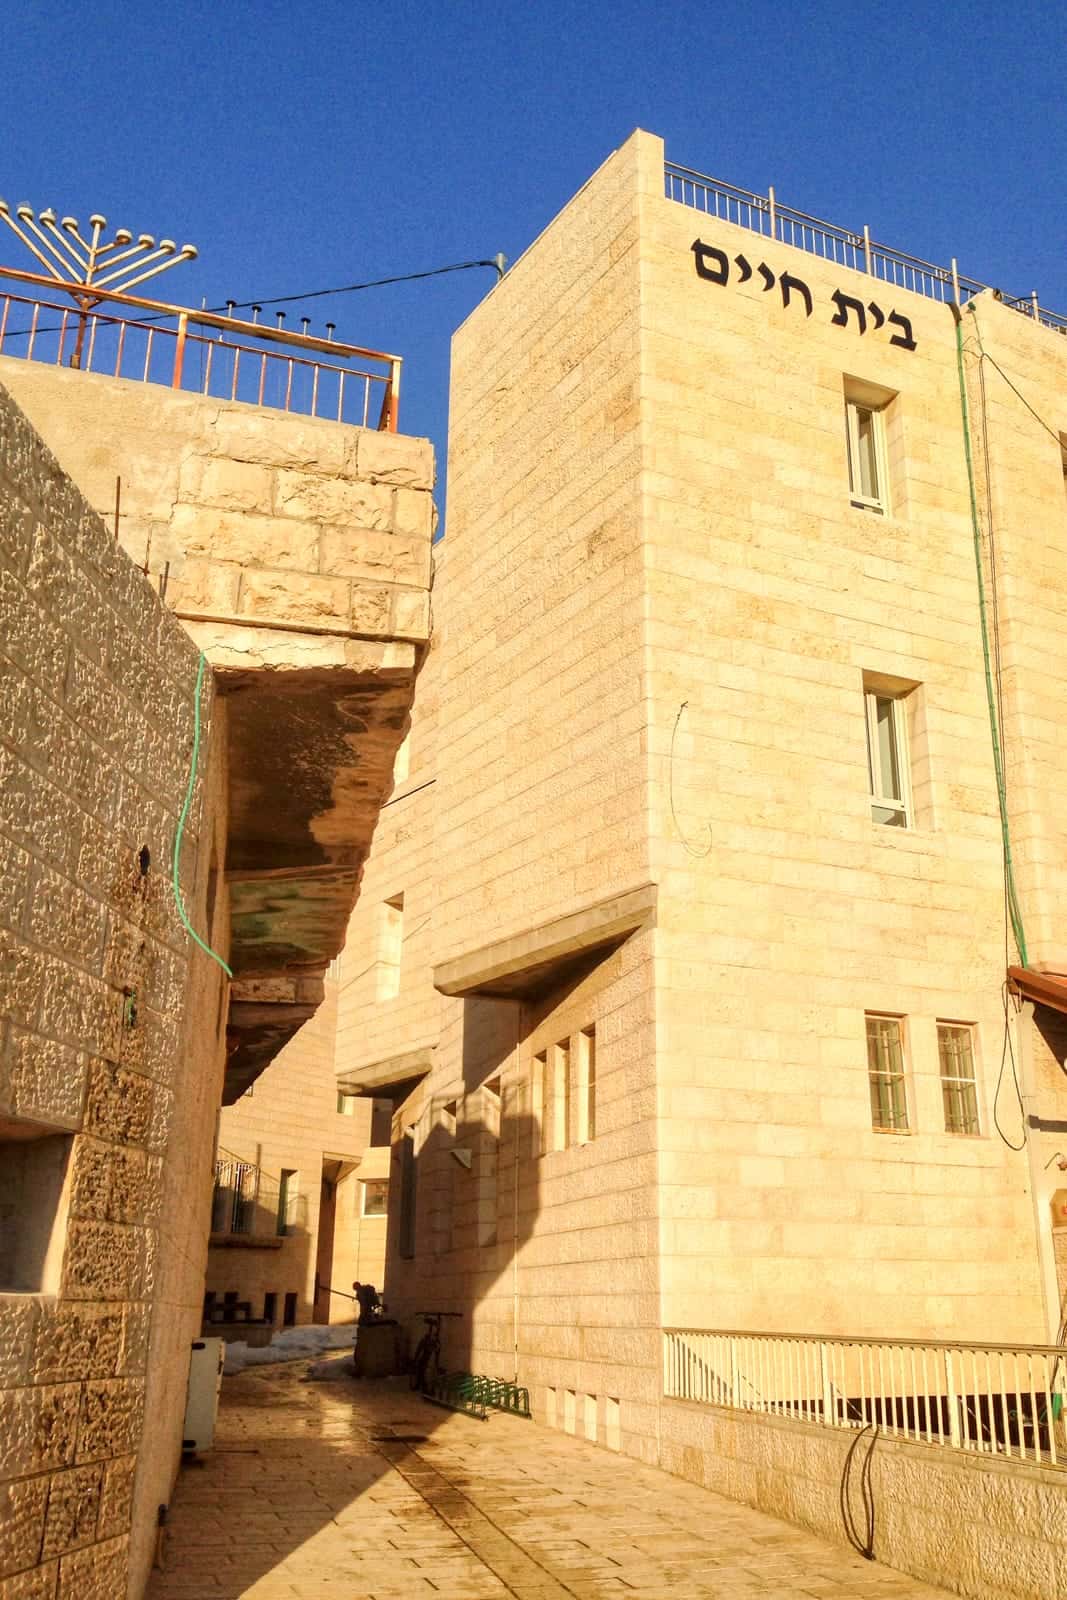 Jewish Synagogue in Hebron in the West Bank, Palestine